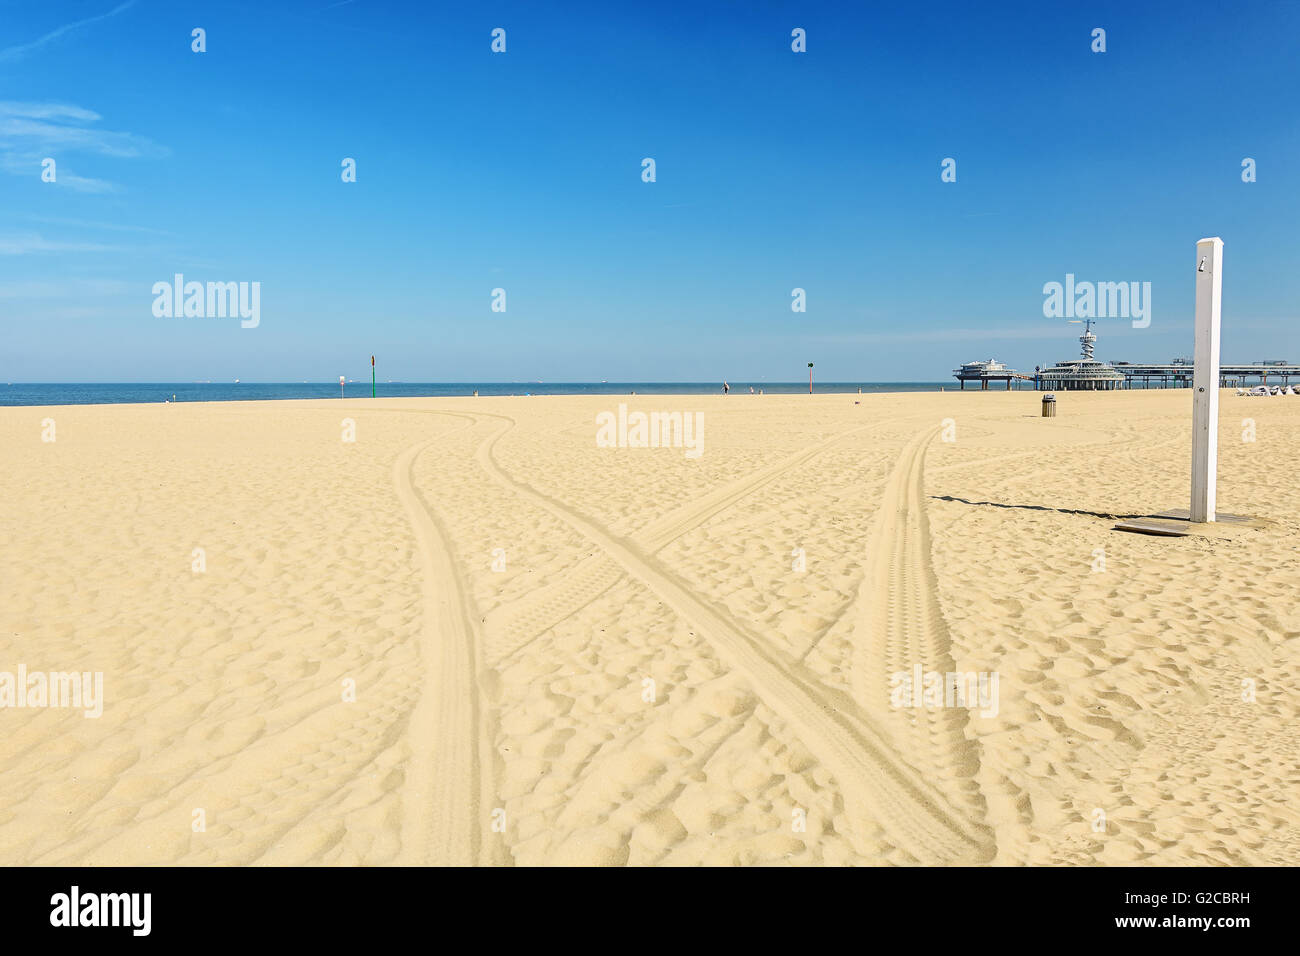 Traces from the car on the sand leading to the sea. Stock Photo